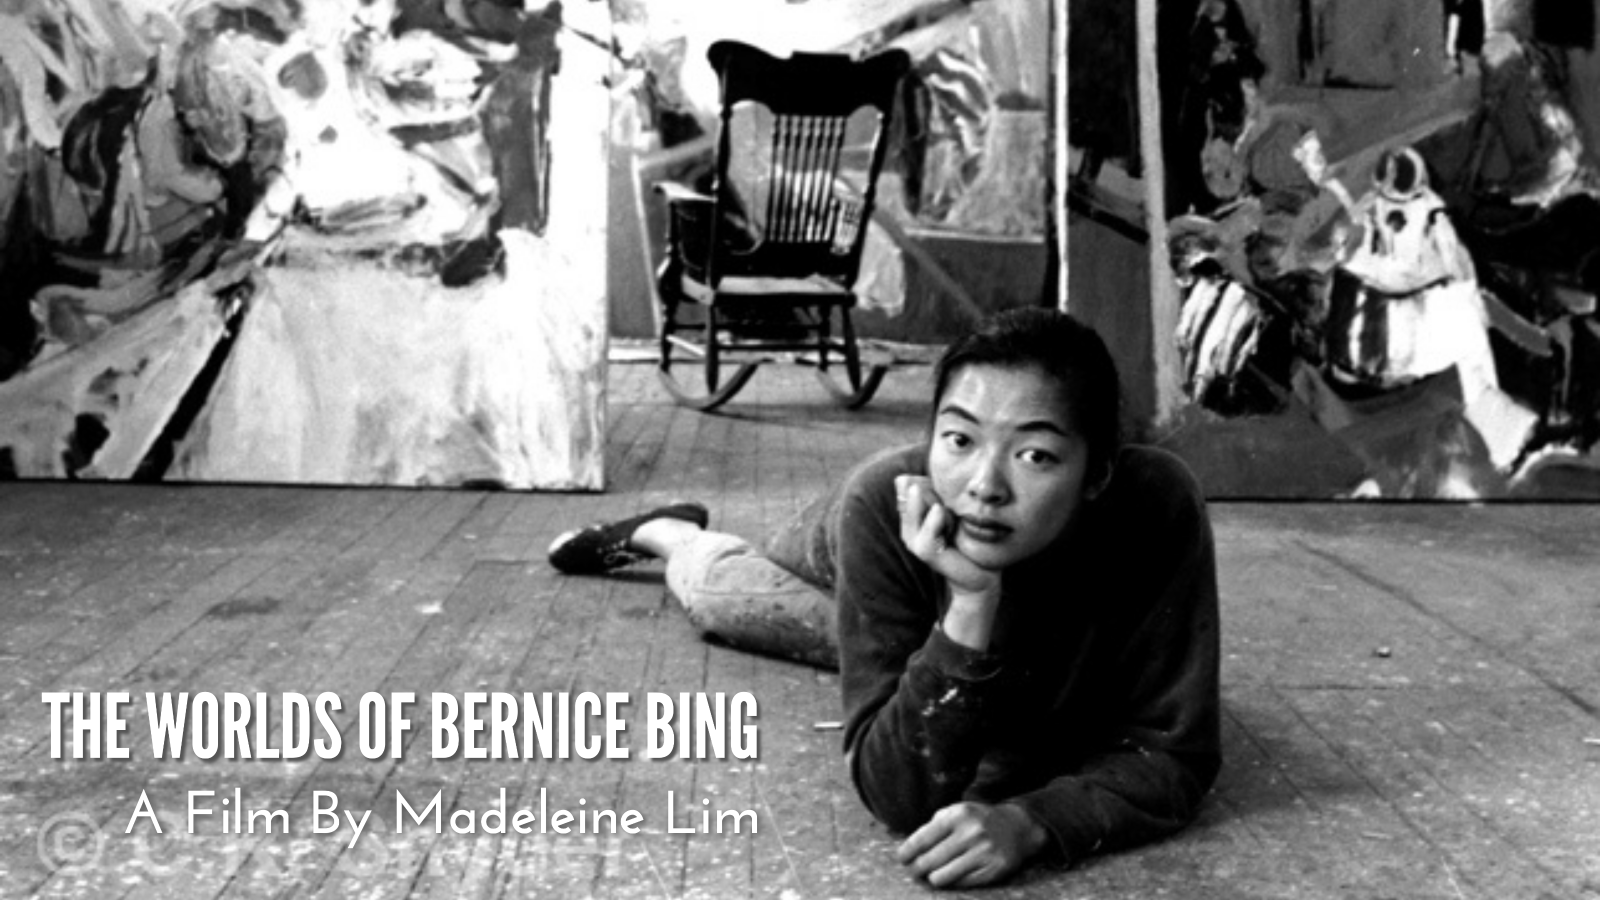 A black and white photo of Bernice Bing, an Asian American woman with black hair, as she lounges on her stomach on the wood-paneled floor and looks into the camera. Behind her, a large rocking chair sits empty between large abstract paintings that lean against the wall.